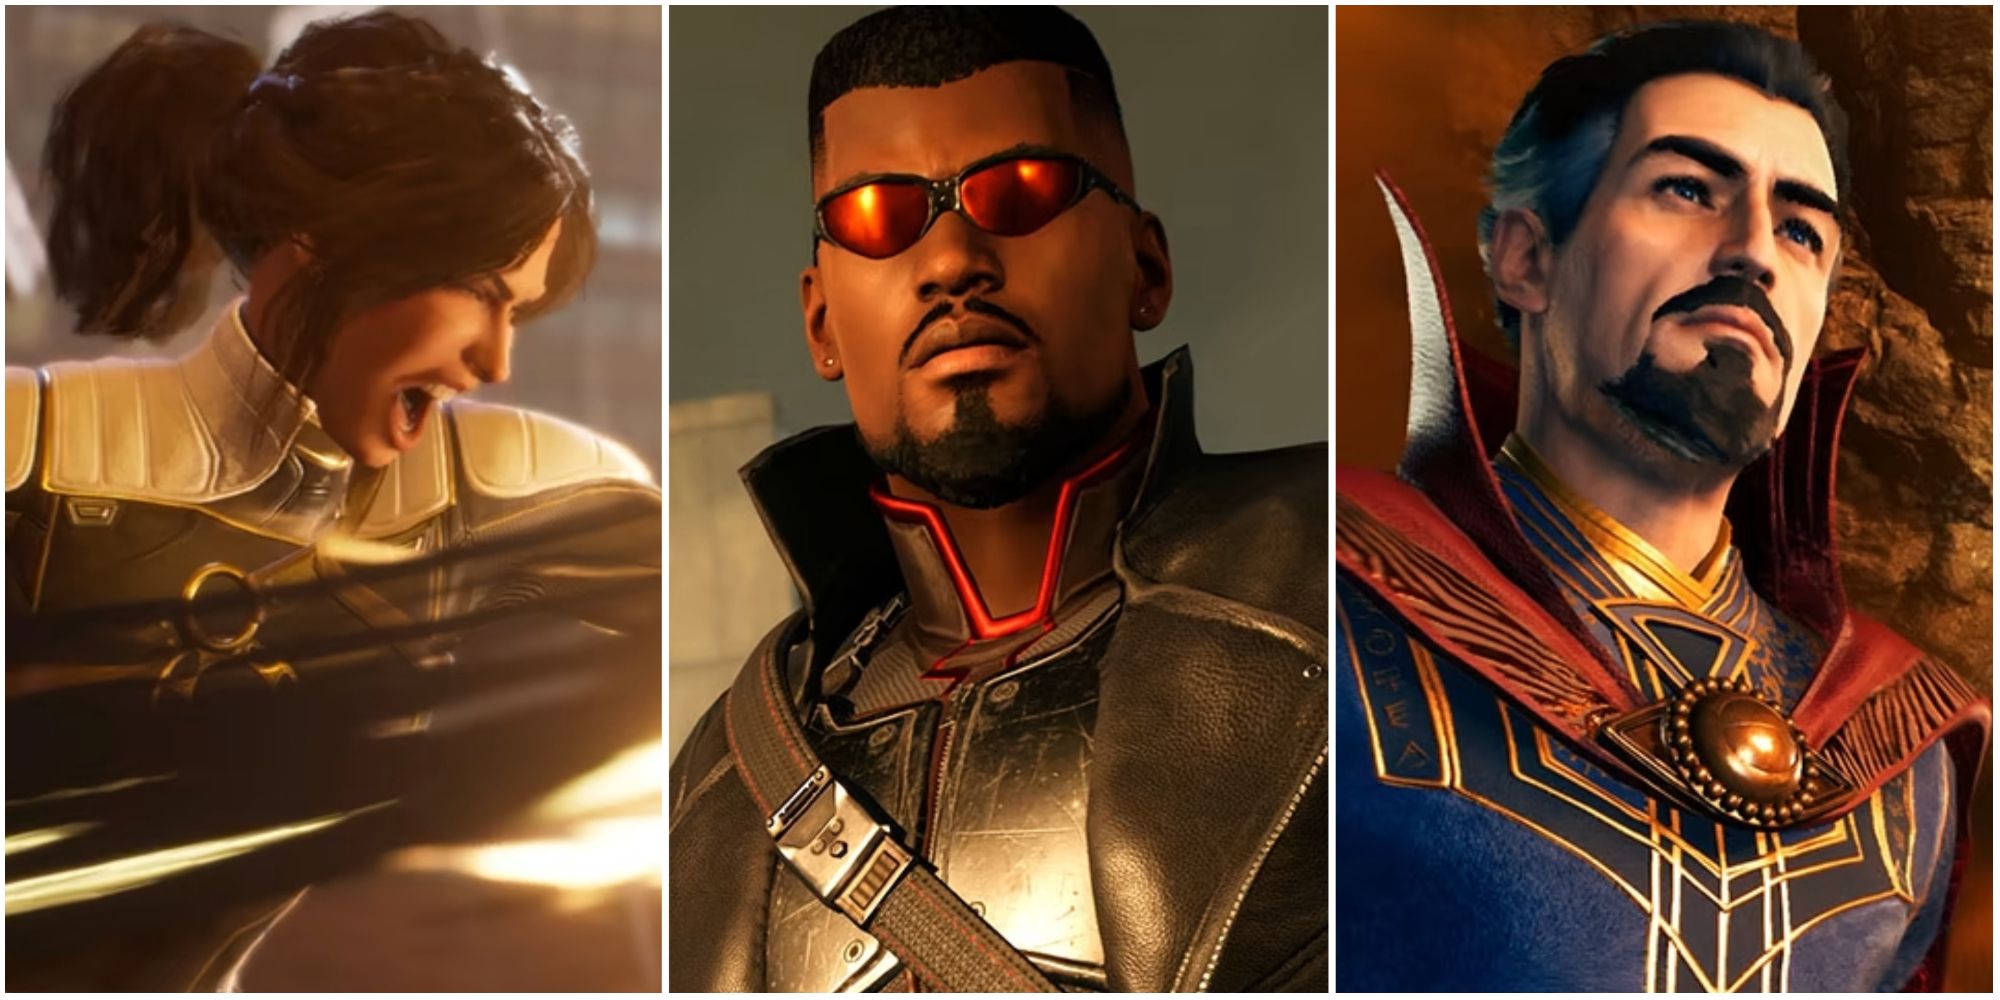 The best Beginner Team Composition (The Hunter, Blade, and Doctor Strange) in Marvel's Midnight Suns